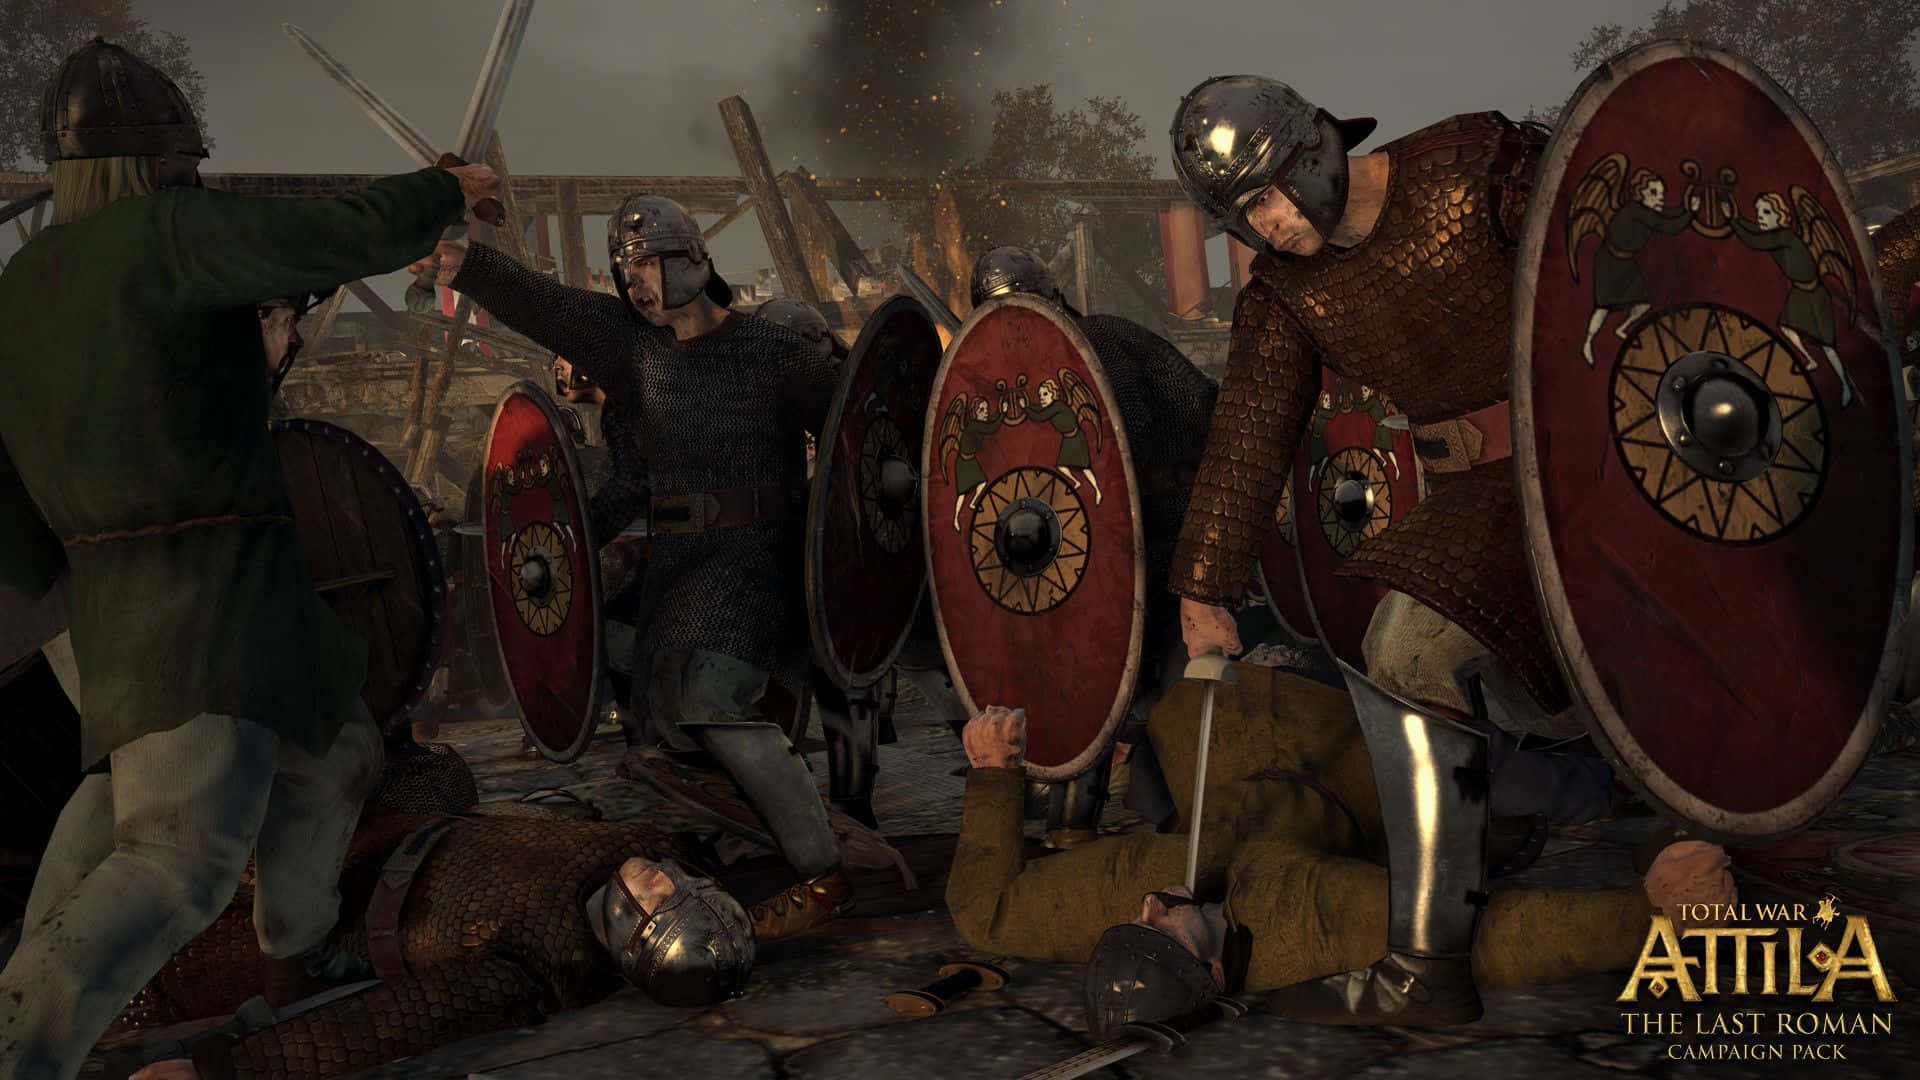 Rallying The Troops For The Wars Ahead In Attila: Total War Background